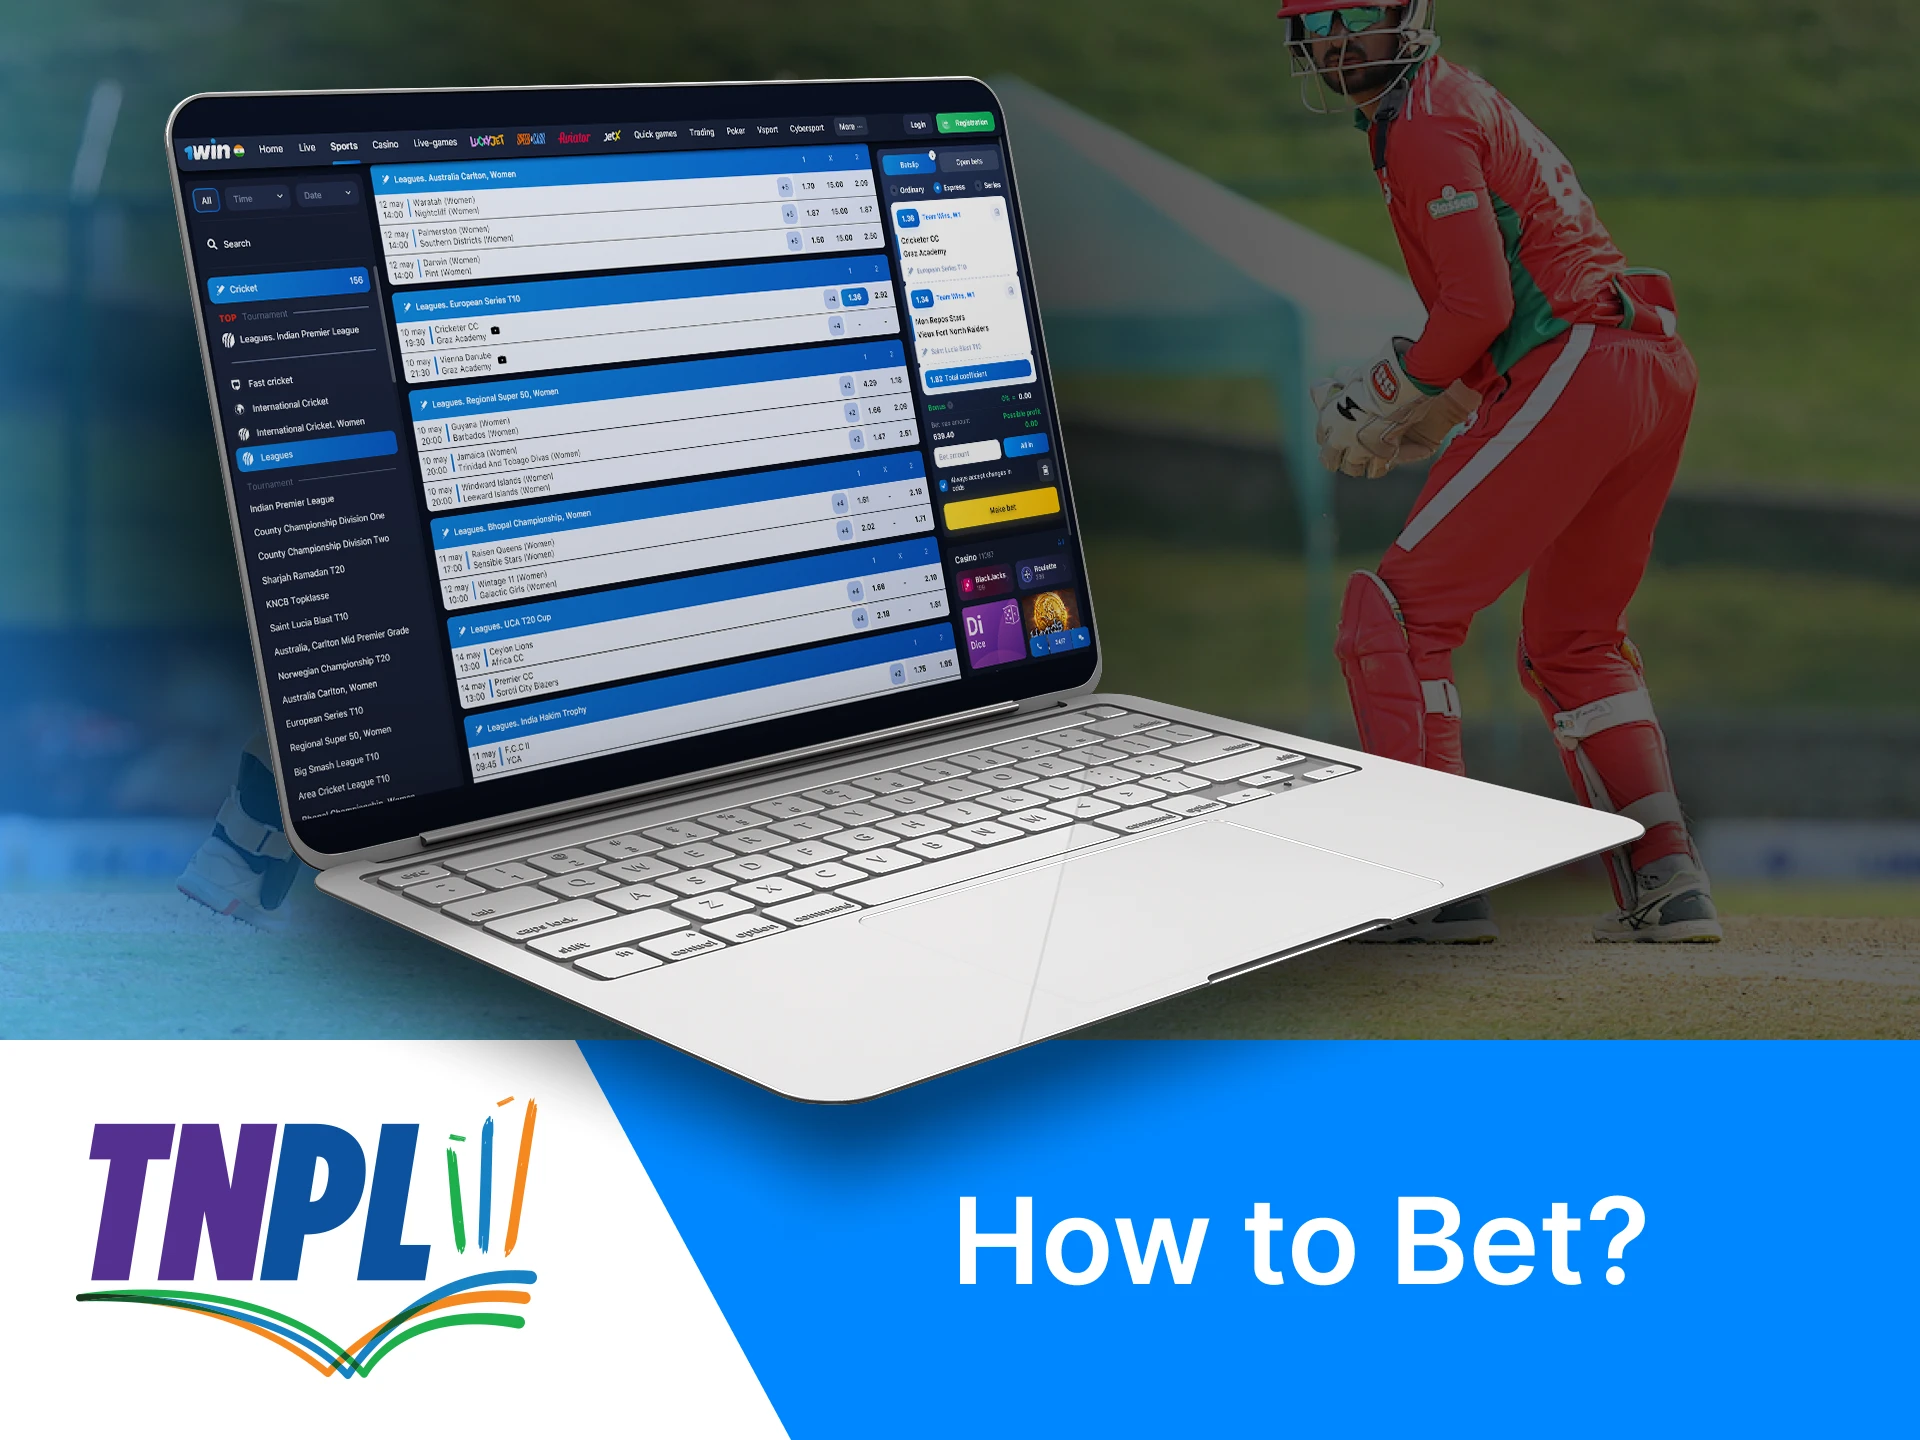 Choose a betting site and make a prediction of the TNPL winner.